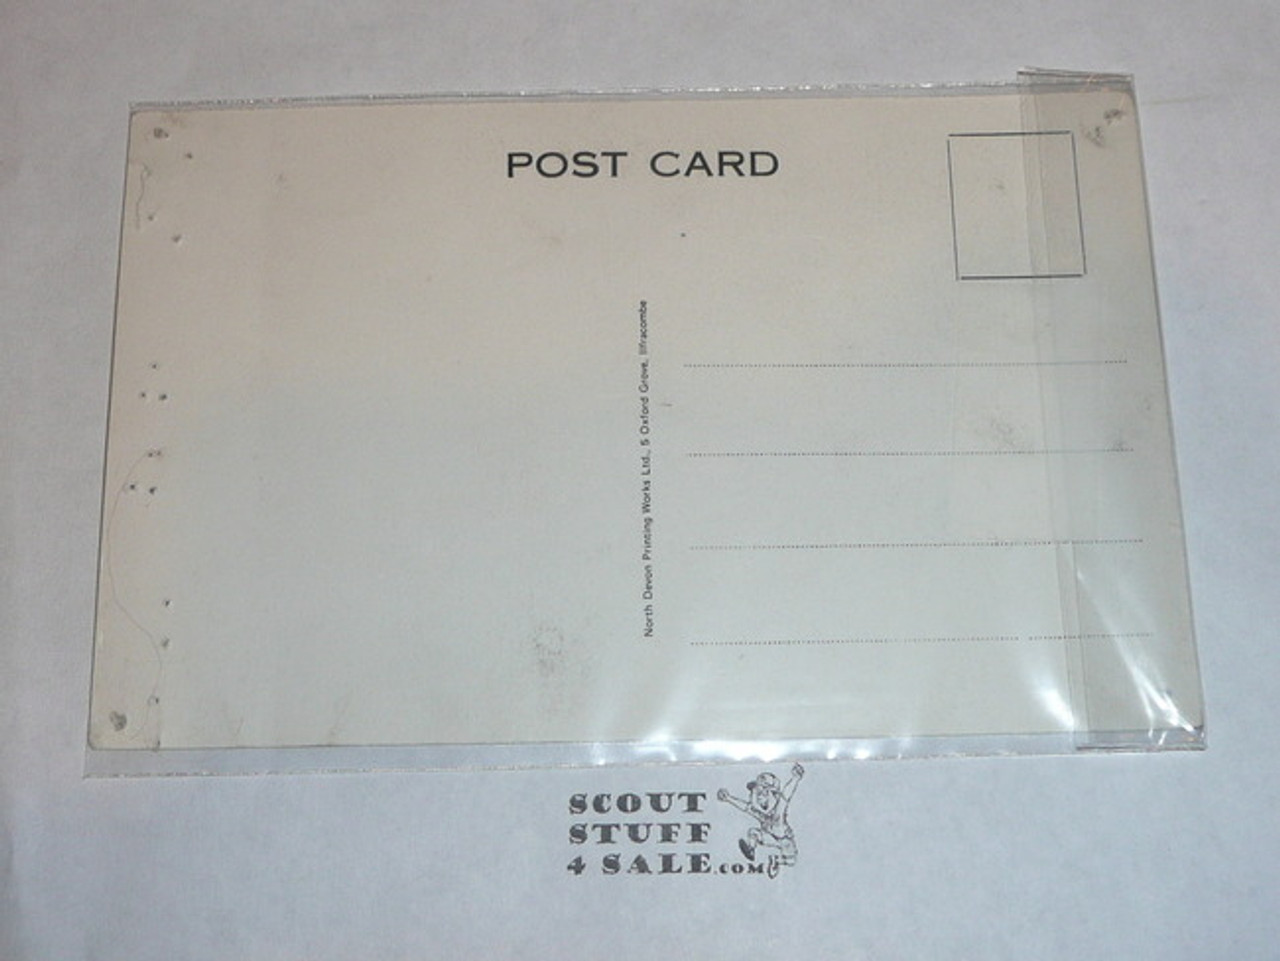 1957 World Jamboree Post Card, #11 of 12 Post card set drawn by Sid Wright, pin holes around the edge from tacking to a bulletin board